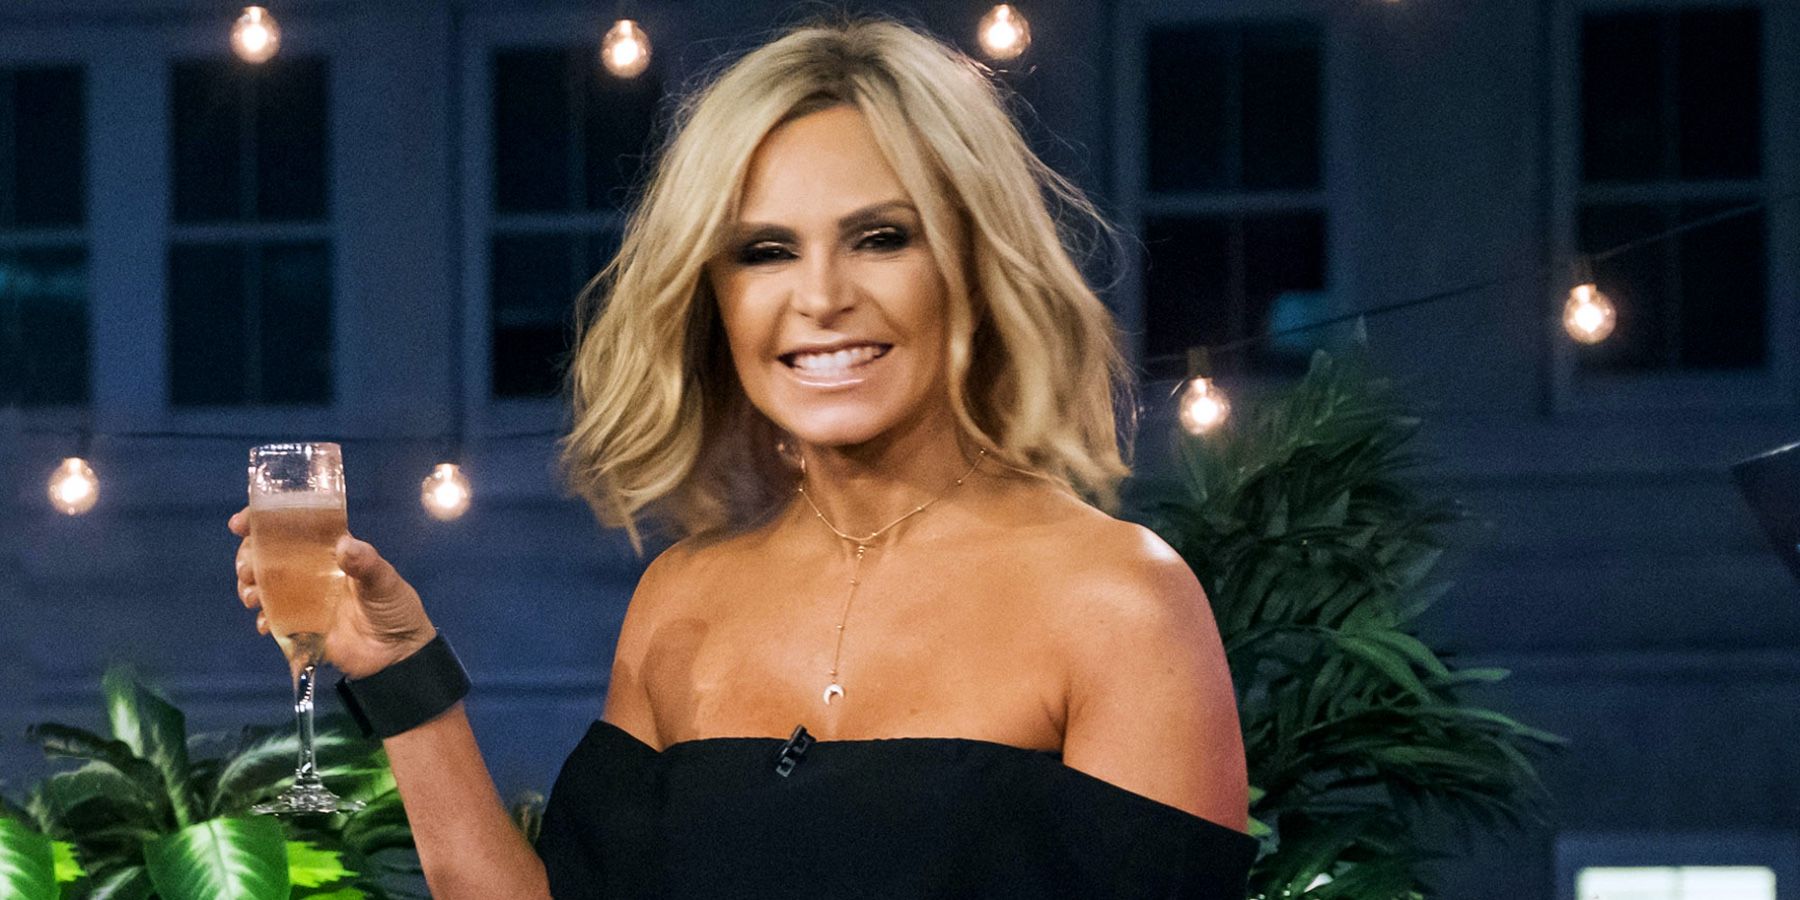 Tamra Judge holding a glass of champagne and smiling in RHOC